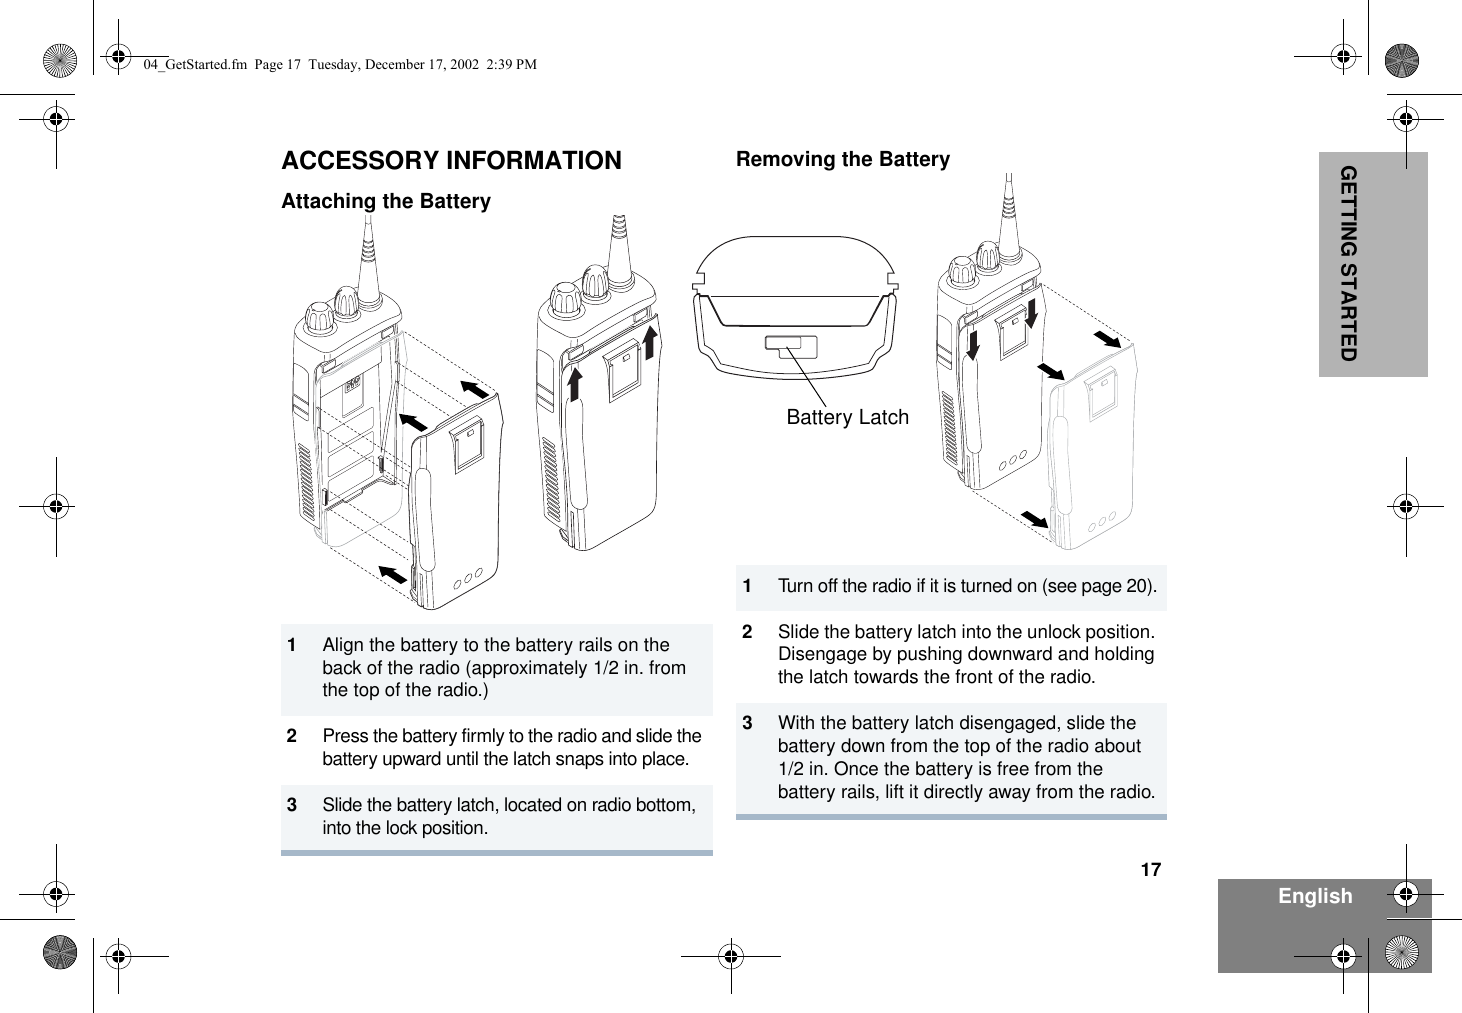 17EnglishGETTING STARTEDACCESSORY INFORMATIONAttaching the BatteryRemoving the Battery1Align the battery to the battery rails on the back of the radio (approximately 1/2 in. from the top of the radio.)2Press the battery firmly to the radio and slide the battery upward until the latch snaps into place.3Slide the battery latch, located on radio bottom,  into the lock position.1Turn off the radio if it is turned on (see page 20).2Slide the battery latch into the unlock position. Disengage by pushing downward and holding the latch towards the front of the radio.3With the battery latch disengaged, slide the battery down from the top of the radio about 1/2 in. Once the battery is free from the battery rails, lift it directly away from the radio.Battery Latch04_GetStarted.fm  Page 17  Tuesday, December 17, 2002  2:39 PM